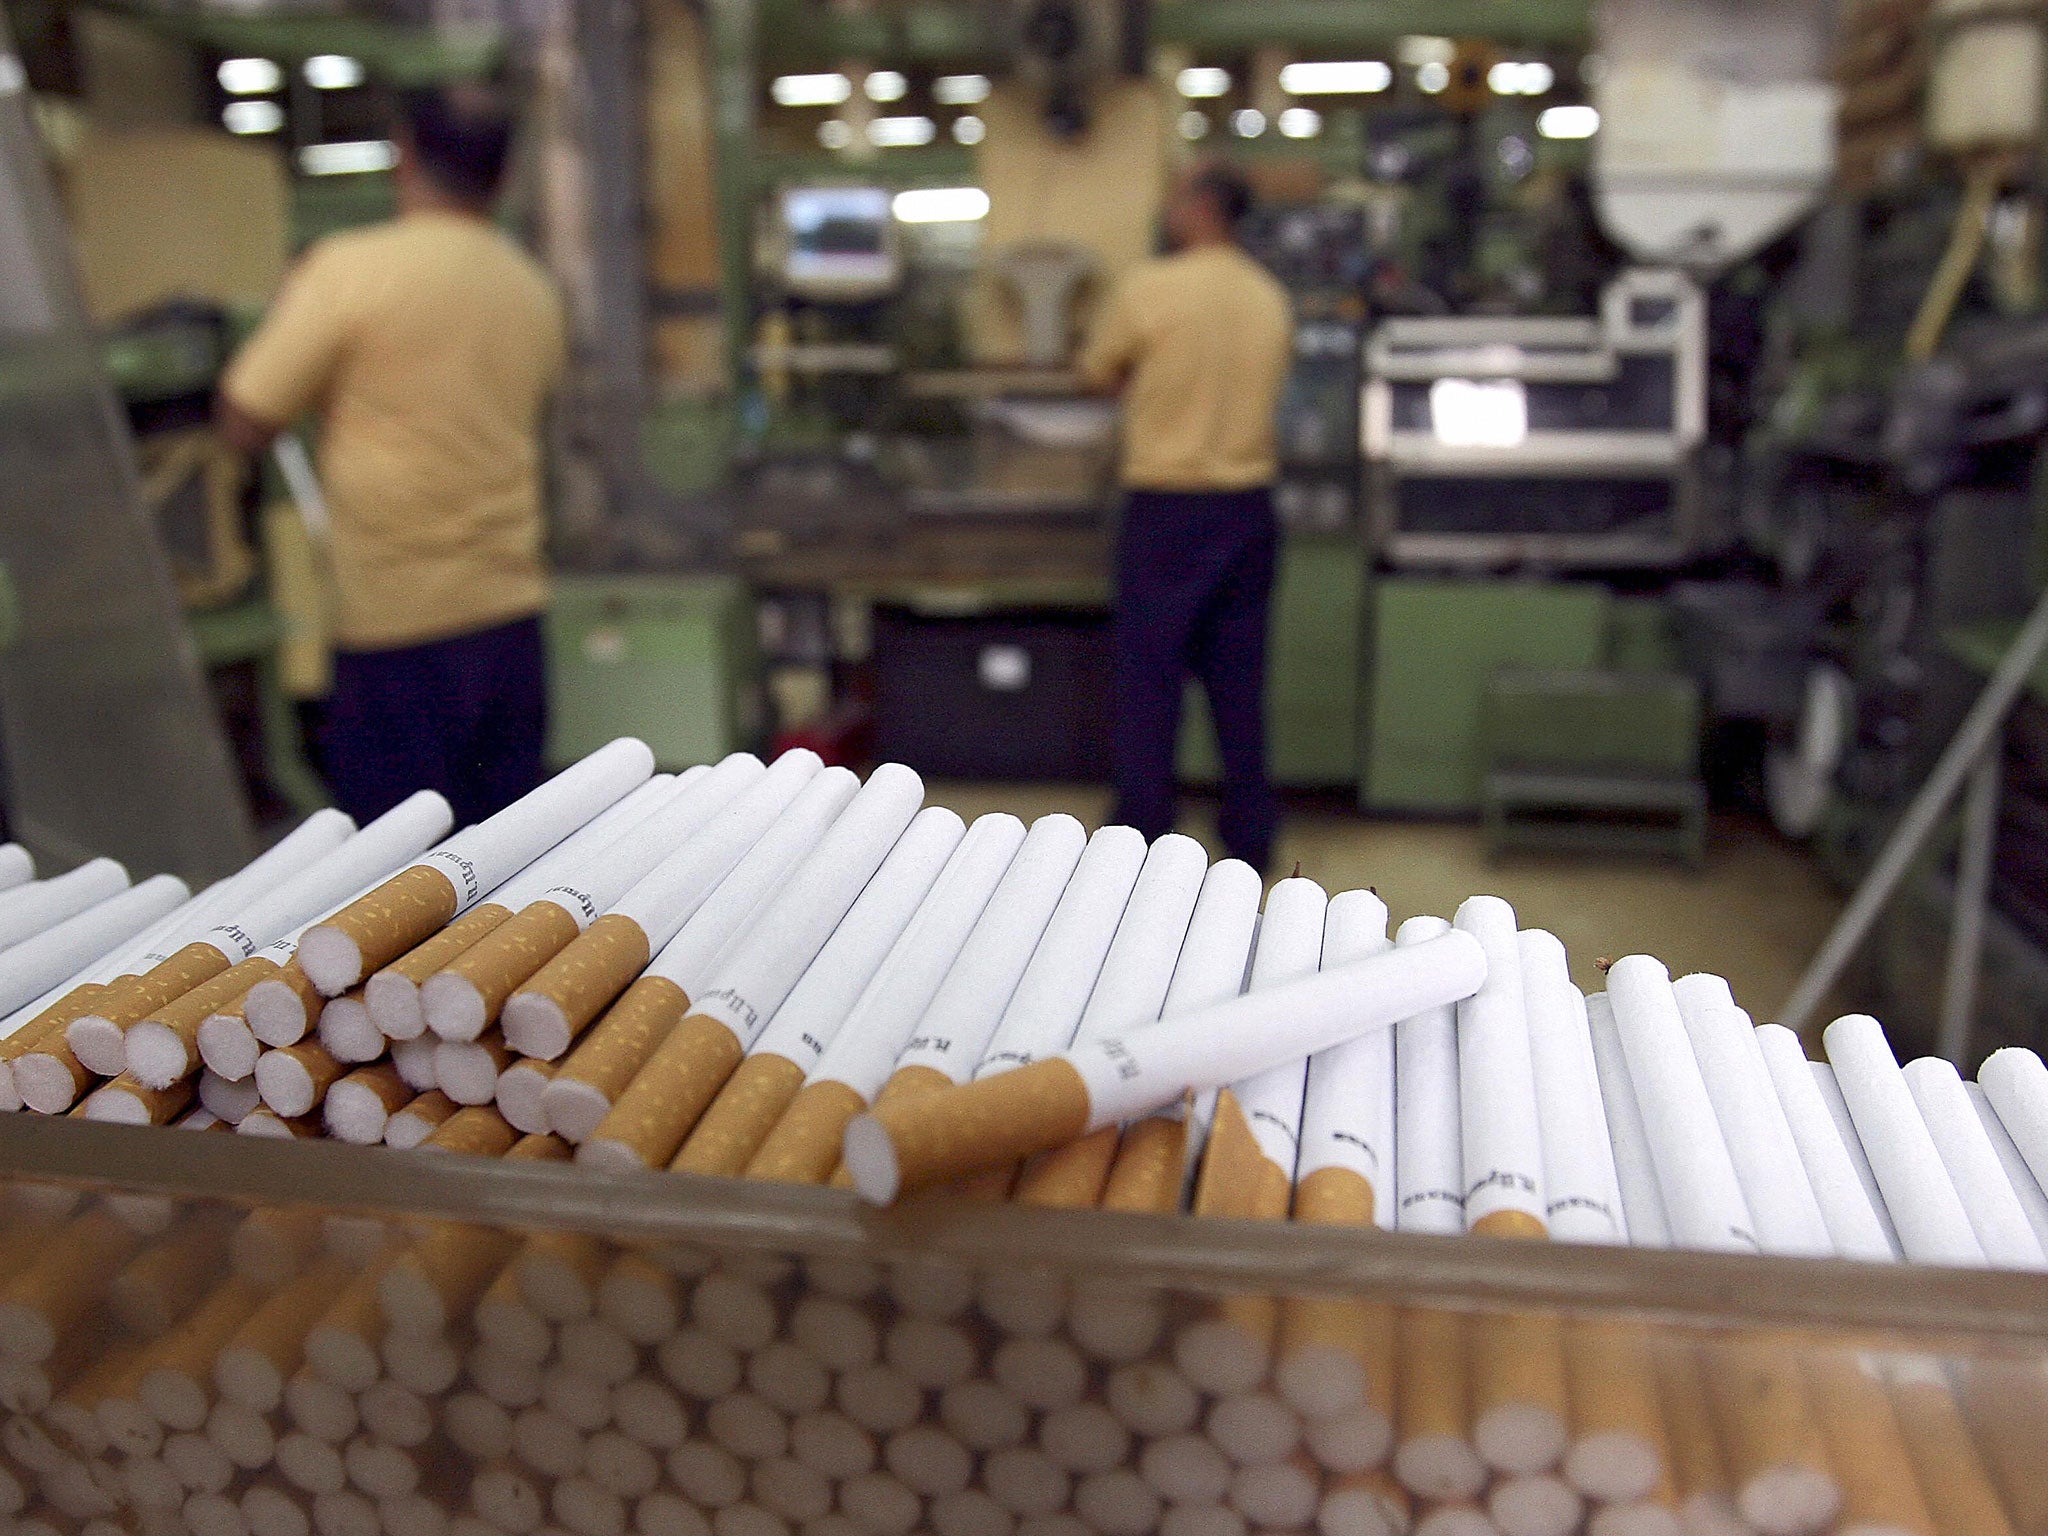 Several councils have already divested of their ‘sin stock’ in the tobacco industry and moved to more ethical funds